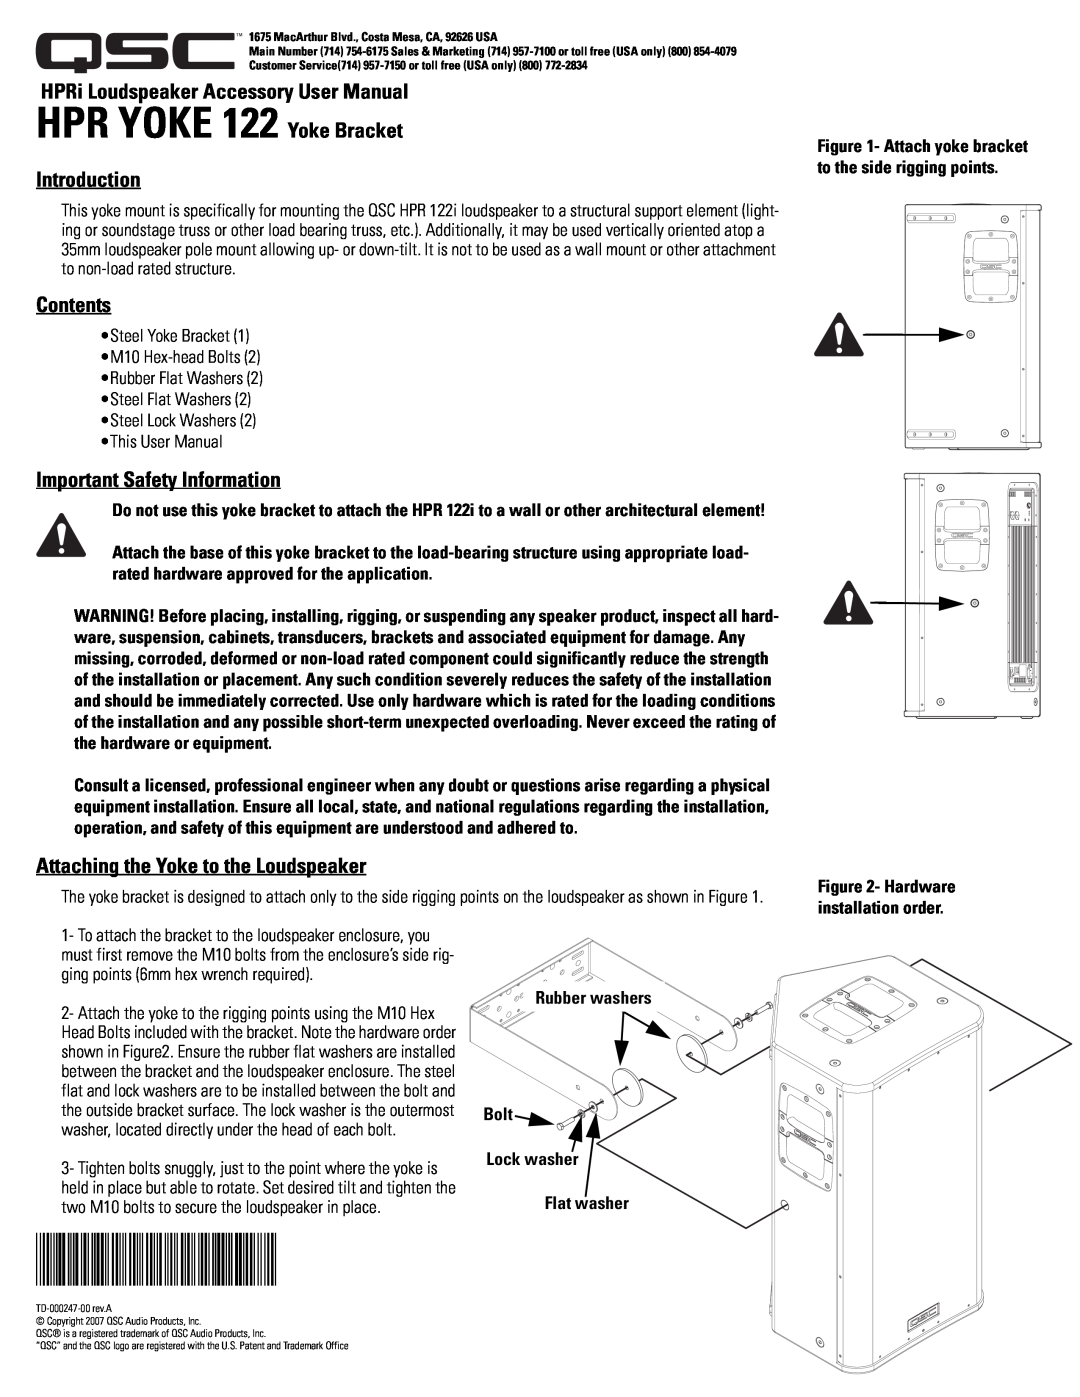 QSC Audio 122 user manual Introduction, Contents, Important Safety Information, Attaching the Yoke to the Loudspeaker 